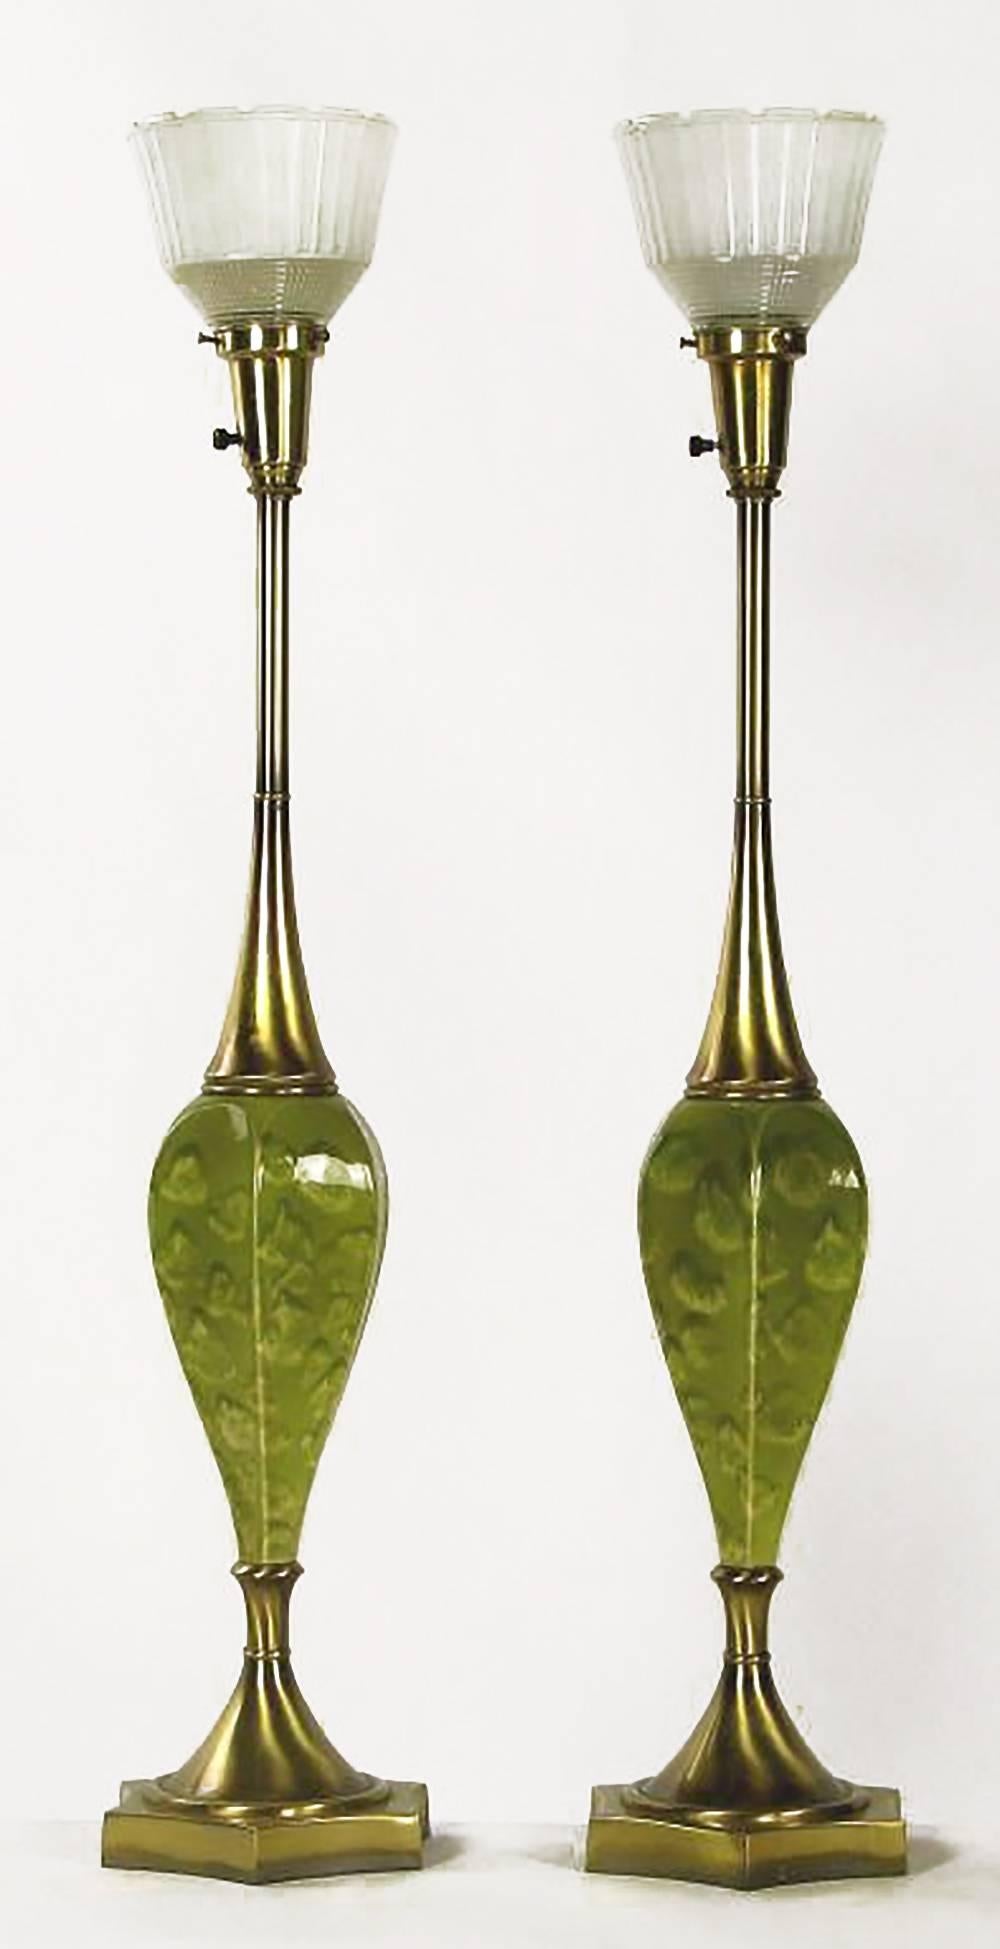 Colorful green lamps, with a green oyster pattern glaze over inverted bulblike ceramic bodies. Base and top are antiqued brass, with the trademark Rembrandt Holophane style glass diffusers. Sold sans shades.